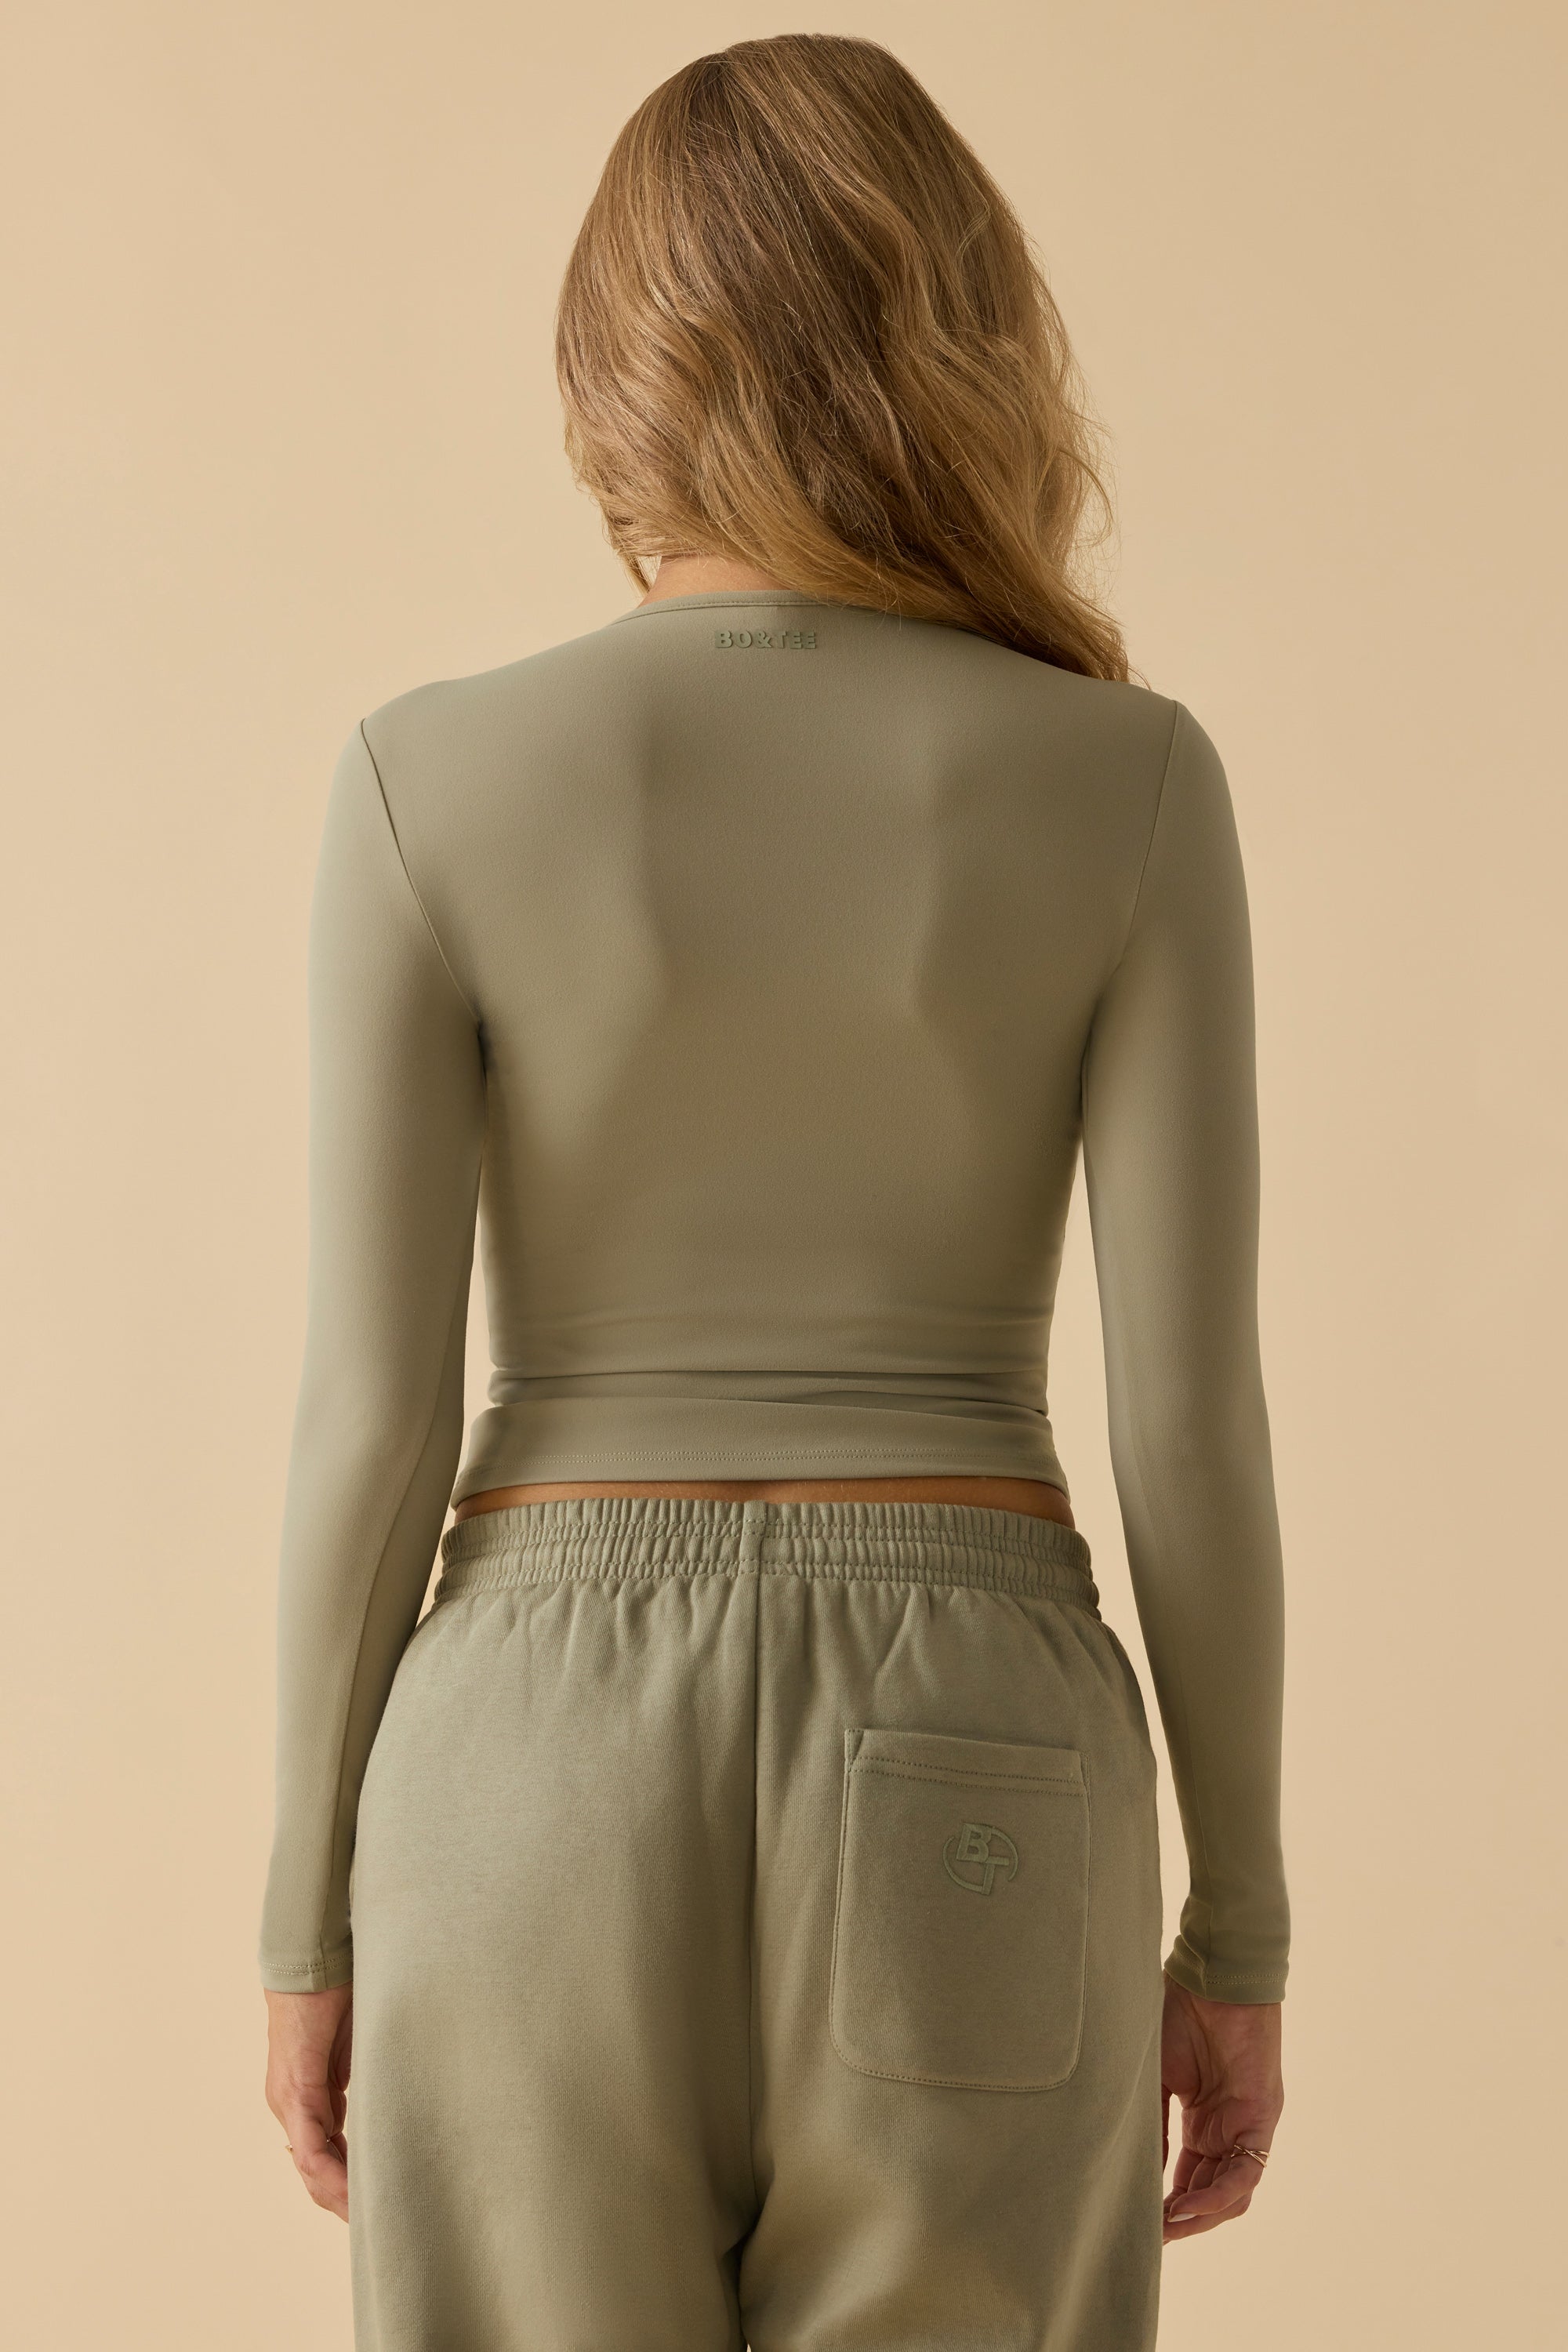 RAE MODE Butter Soft Long Sleeve Active Top In Olive — 2nd Round